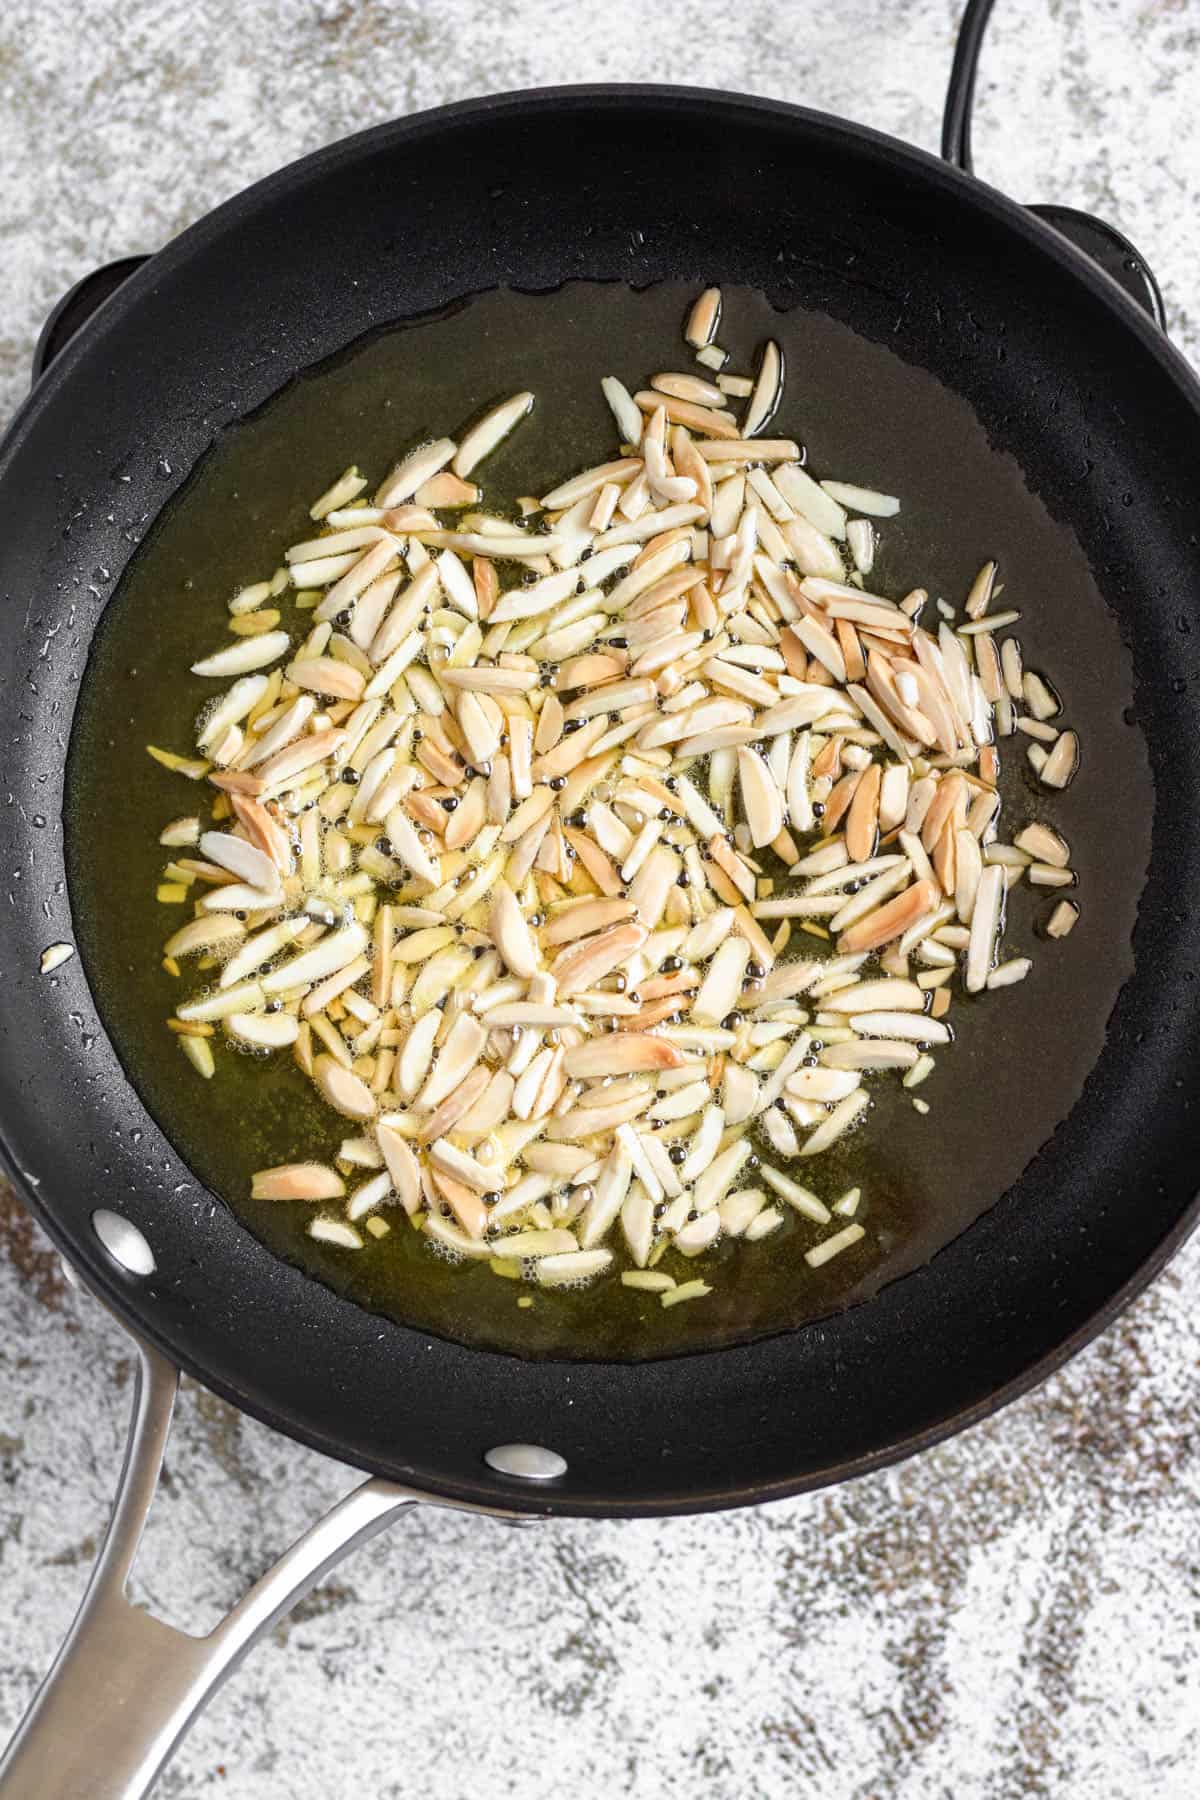 Almonds toasting in a pan with ghee